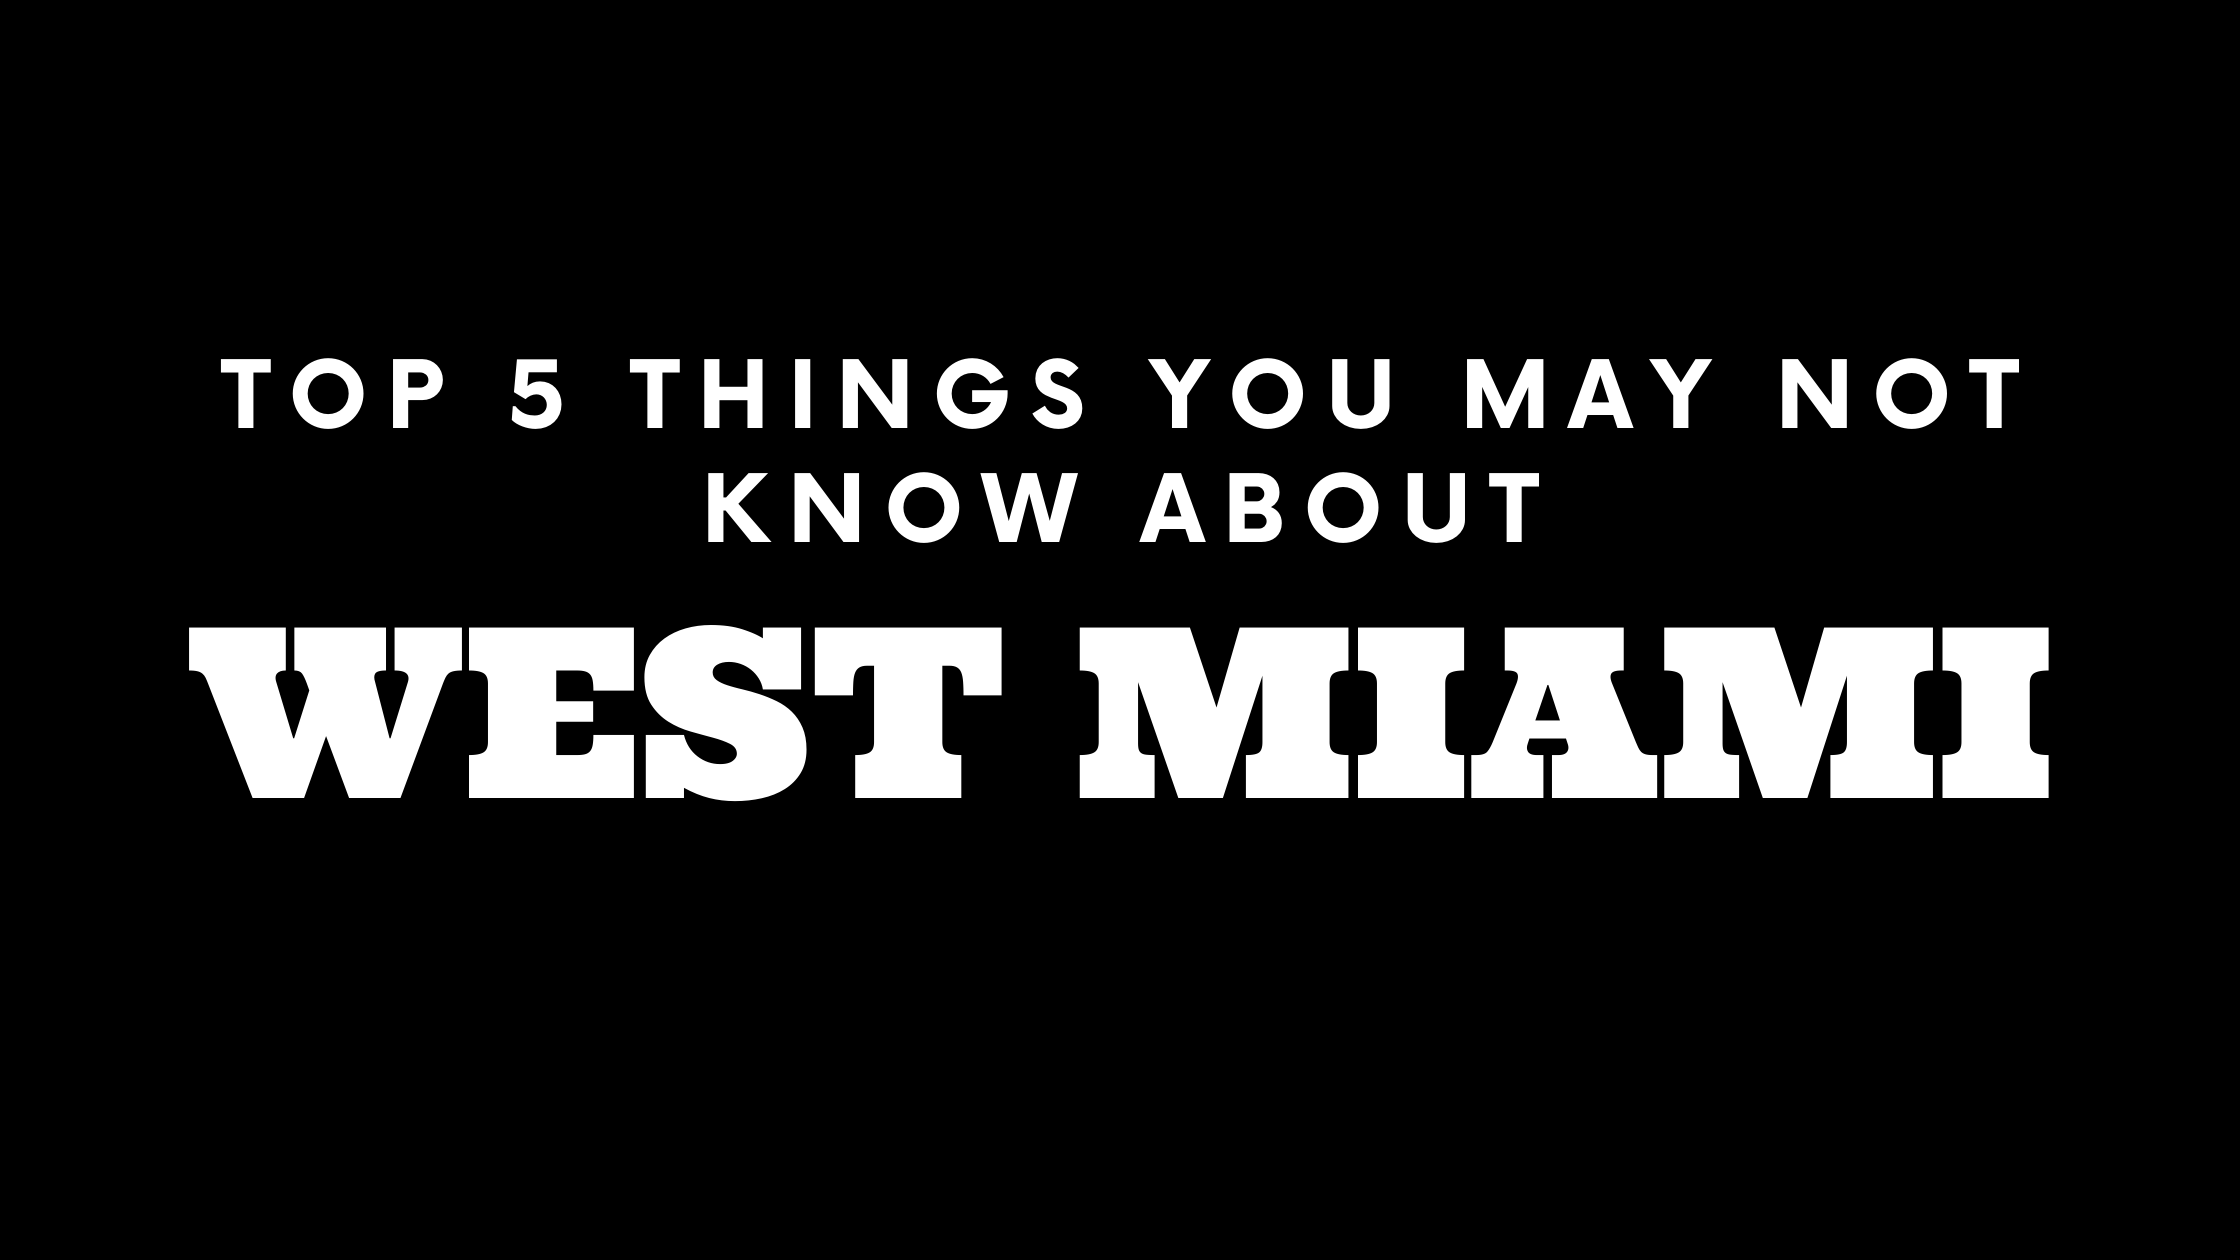 Top 5 Things You May Not Know About West Miami